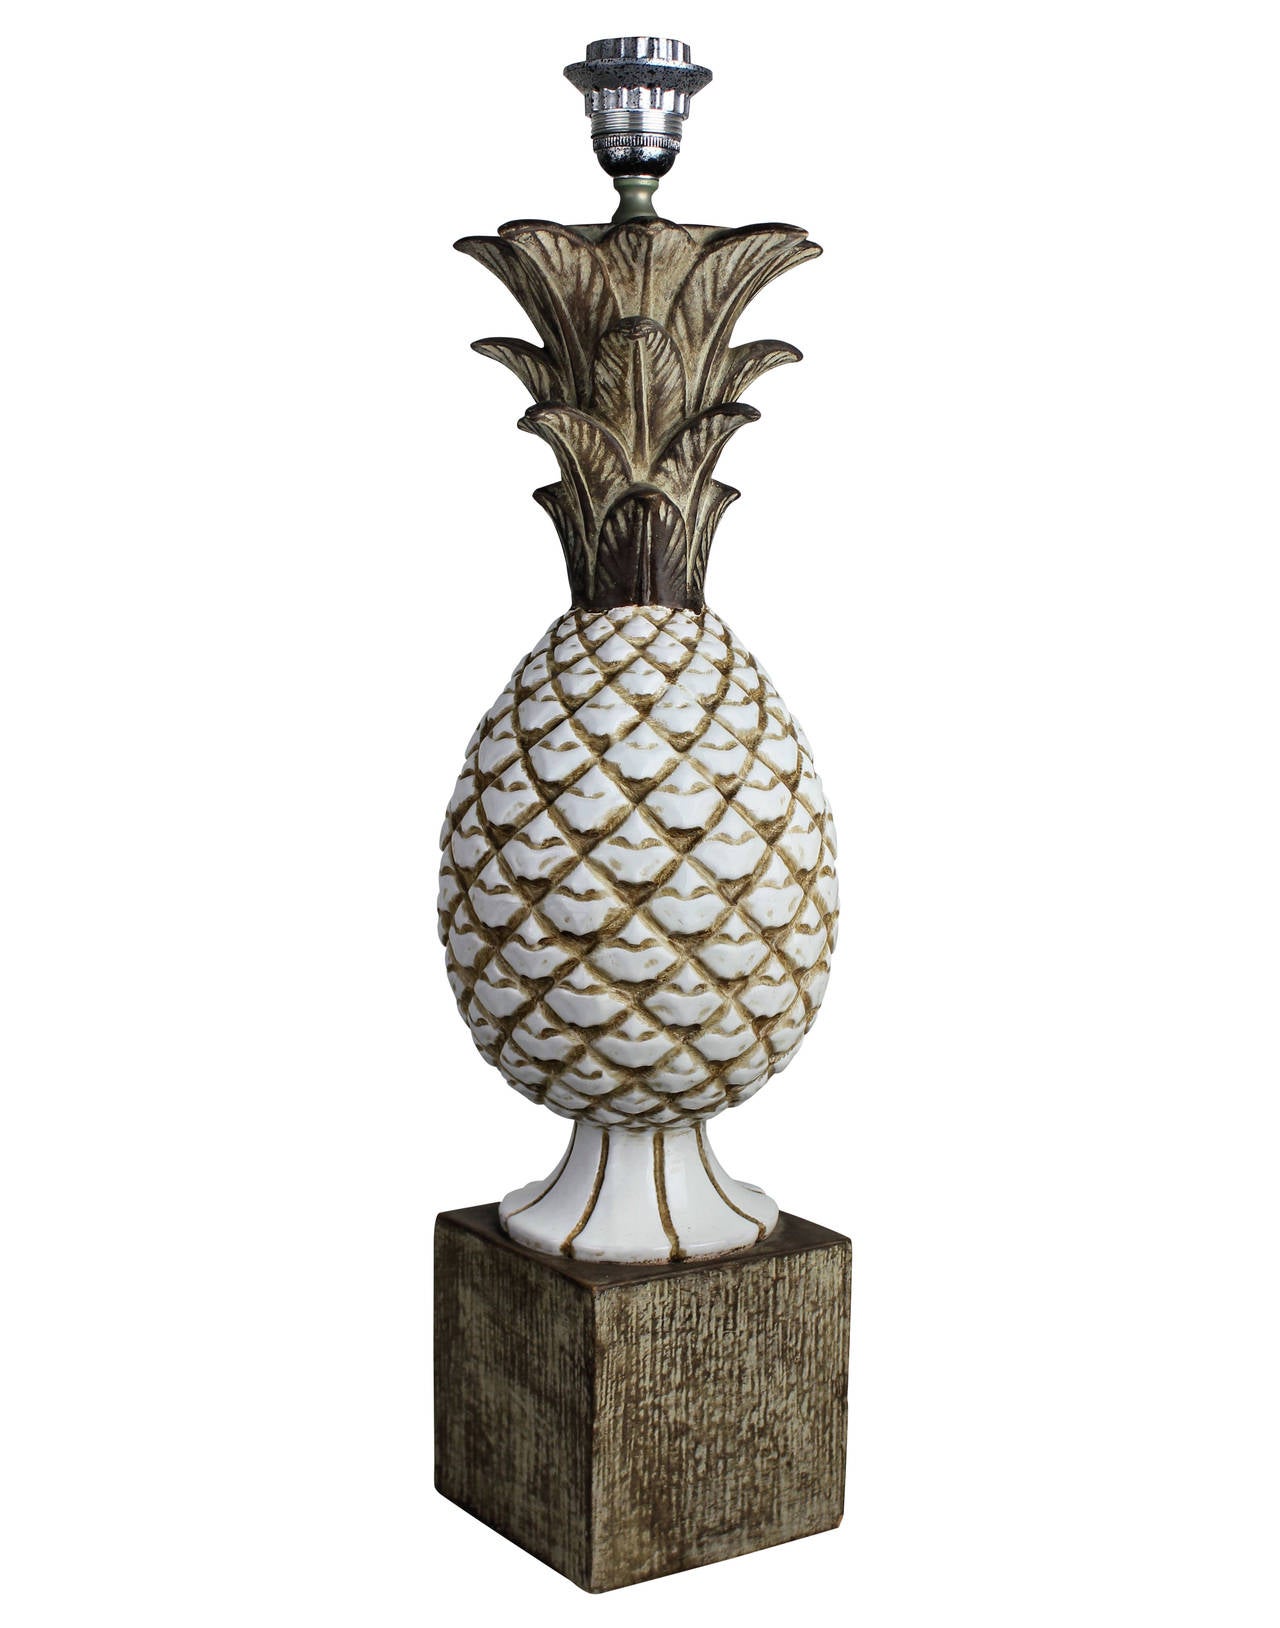 An Italian ceramic lamp depicting a pineapple on a base.